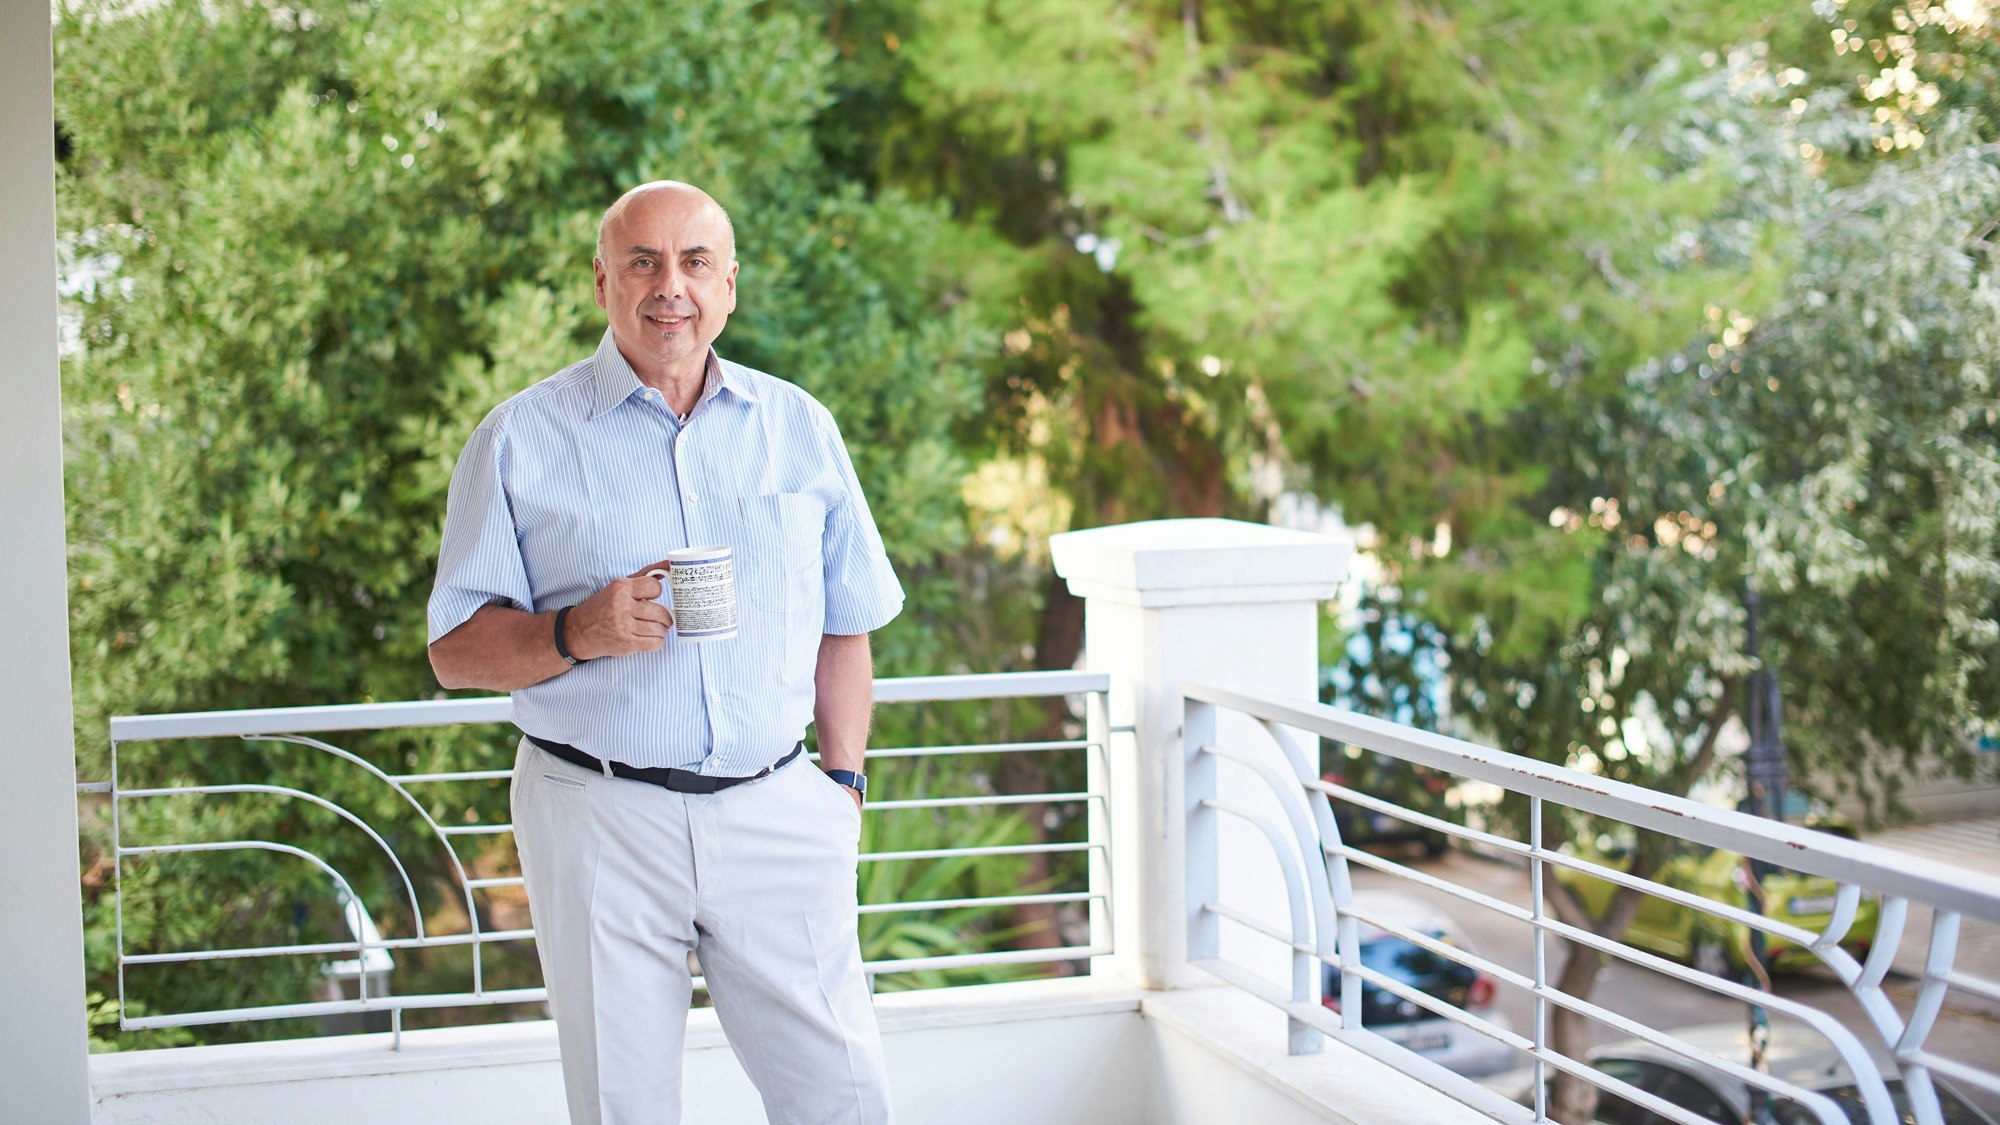 Antonios with a cup of coffee in his hand on terrace outside.